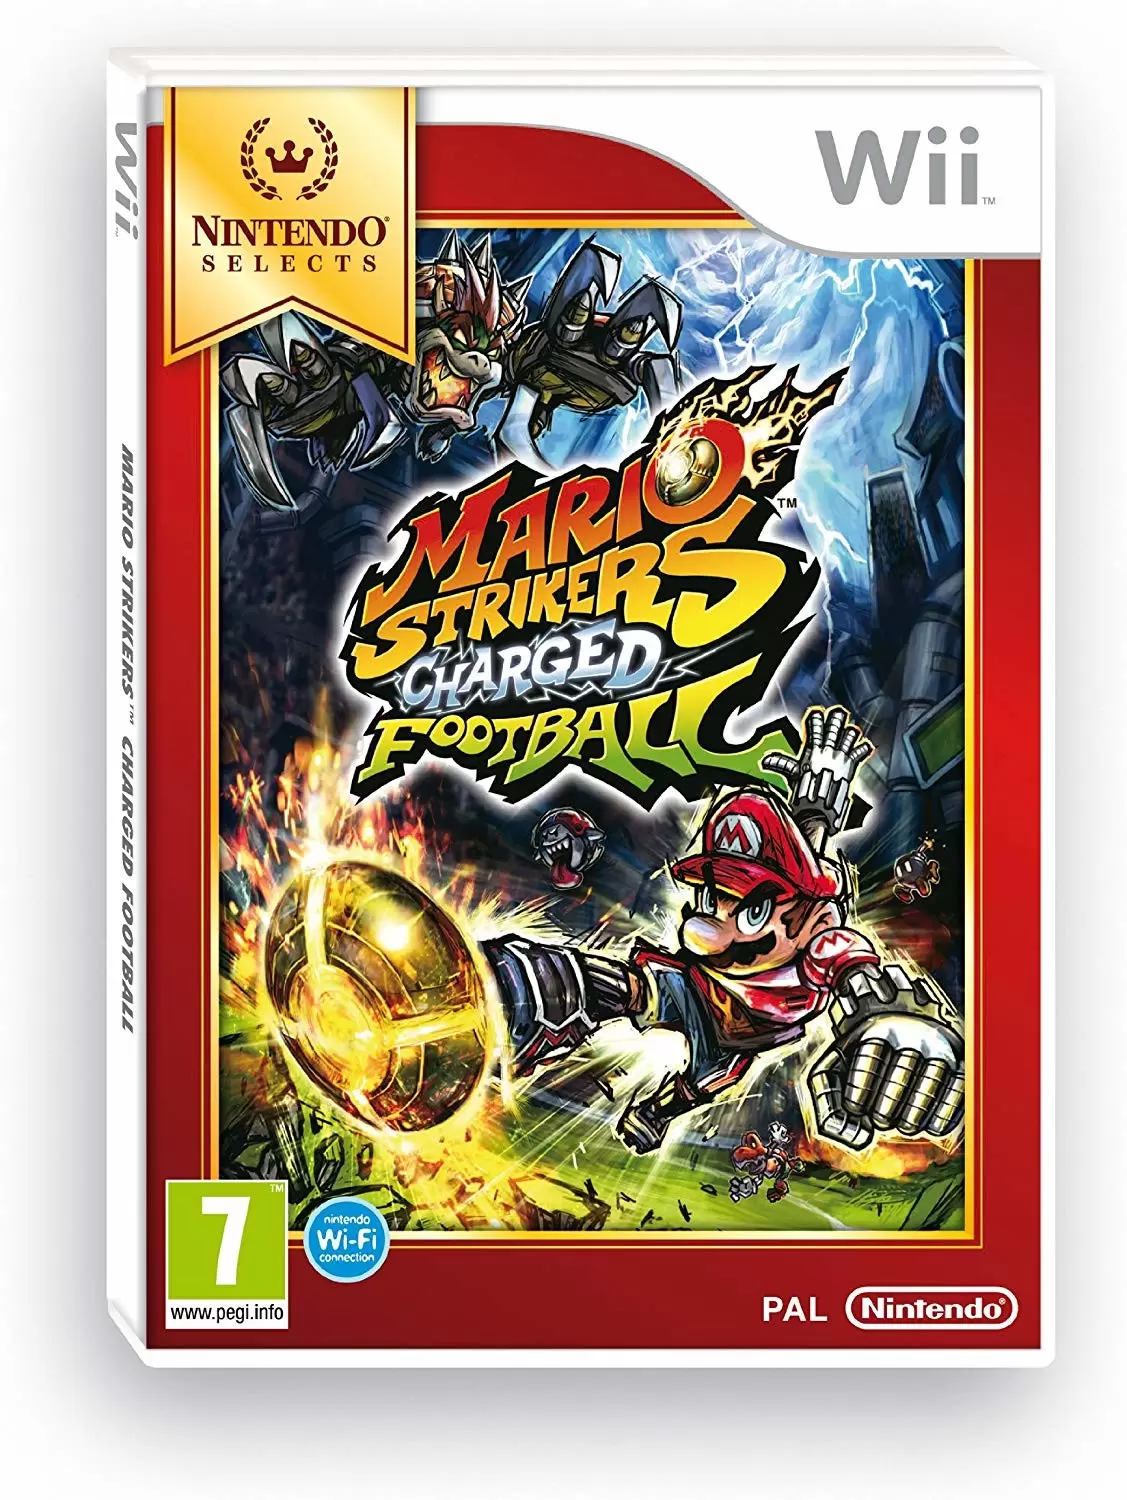 Nintendo Wii Games - Mario strikers charged football nintendo selects